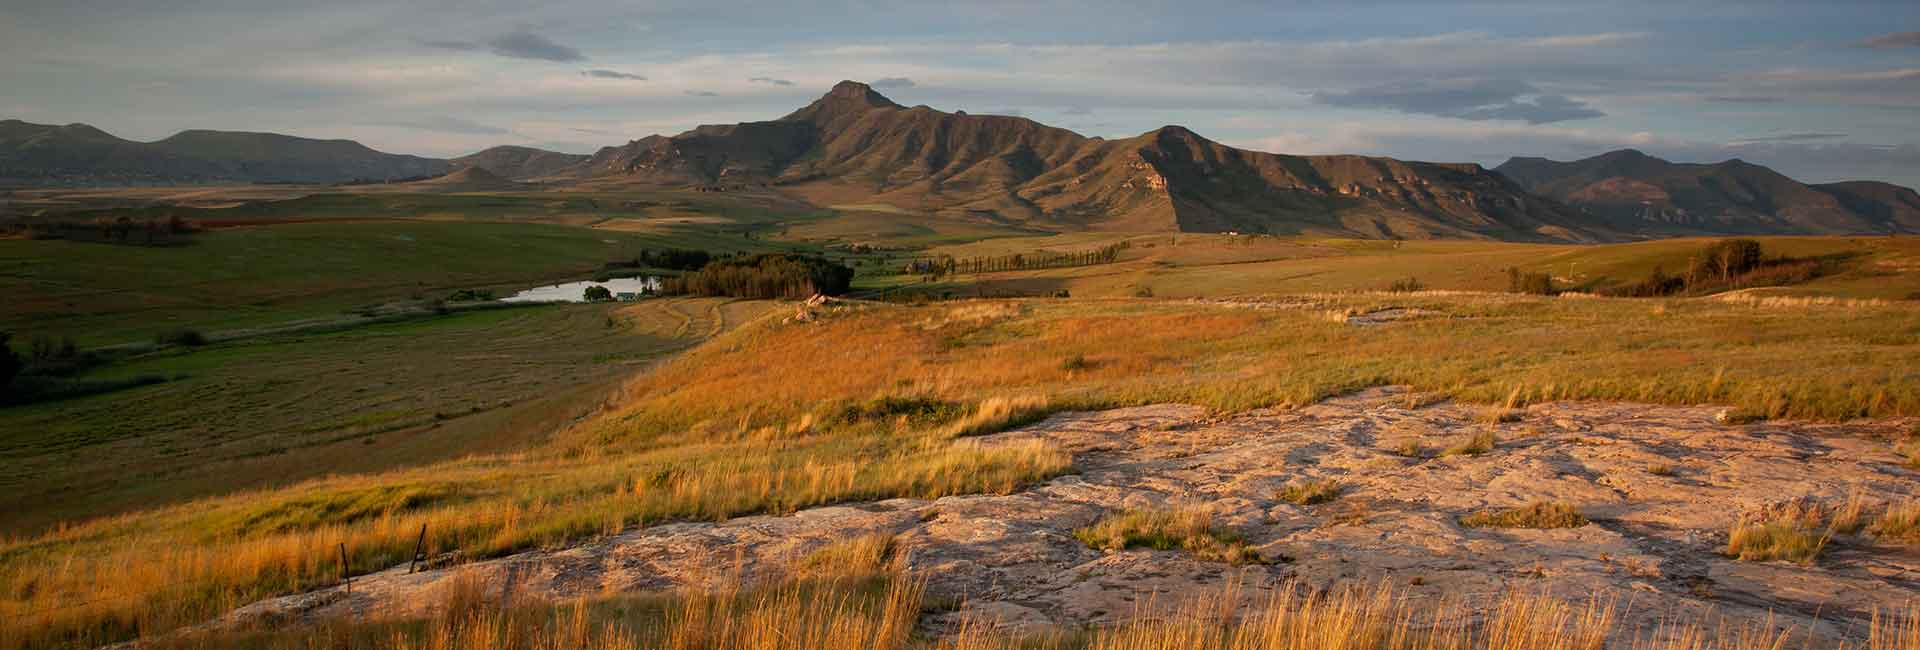 Hunting-in-Free-State-Clarens-South-Africa